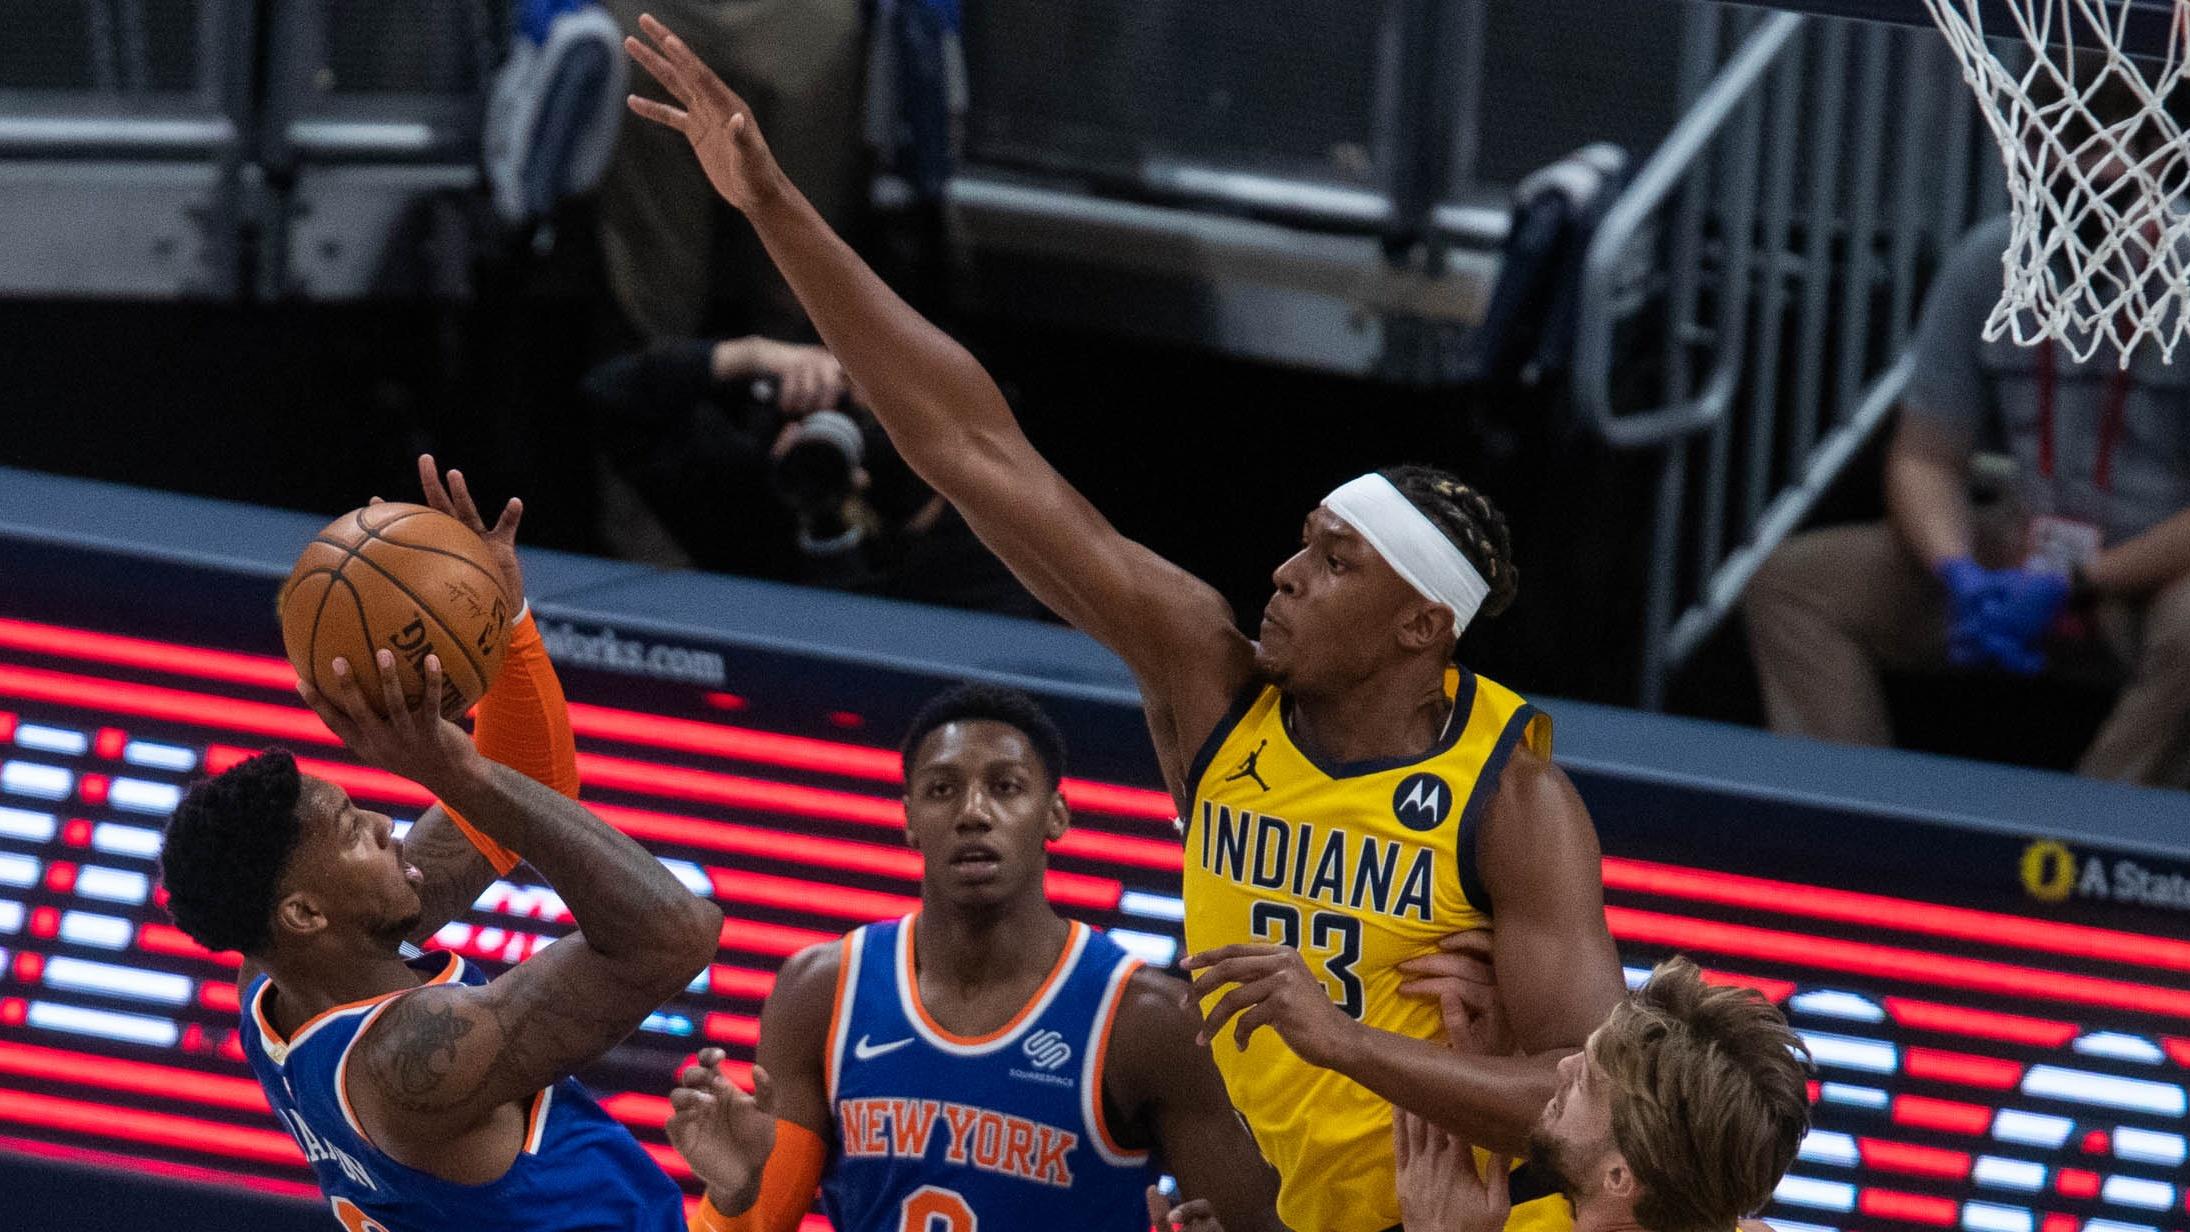 Jan 2, 2021; Indianapolis, Indiana, USA; New York Knicks guard Elfrid Payton (6) shoots the ball while Indiana Pacers center Myles Turner (33) defends in the first quarter at Bankers Life Fieldhouse. Mandatory Credit: Trevor Ruszkowski-USA TODAY Sports / © Trevor Ruszkowski-USA TODAY Sports